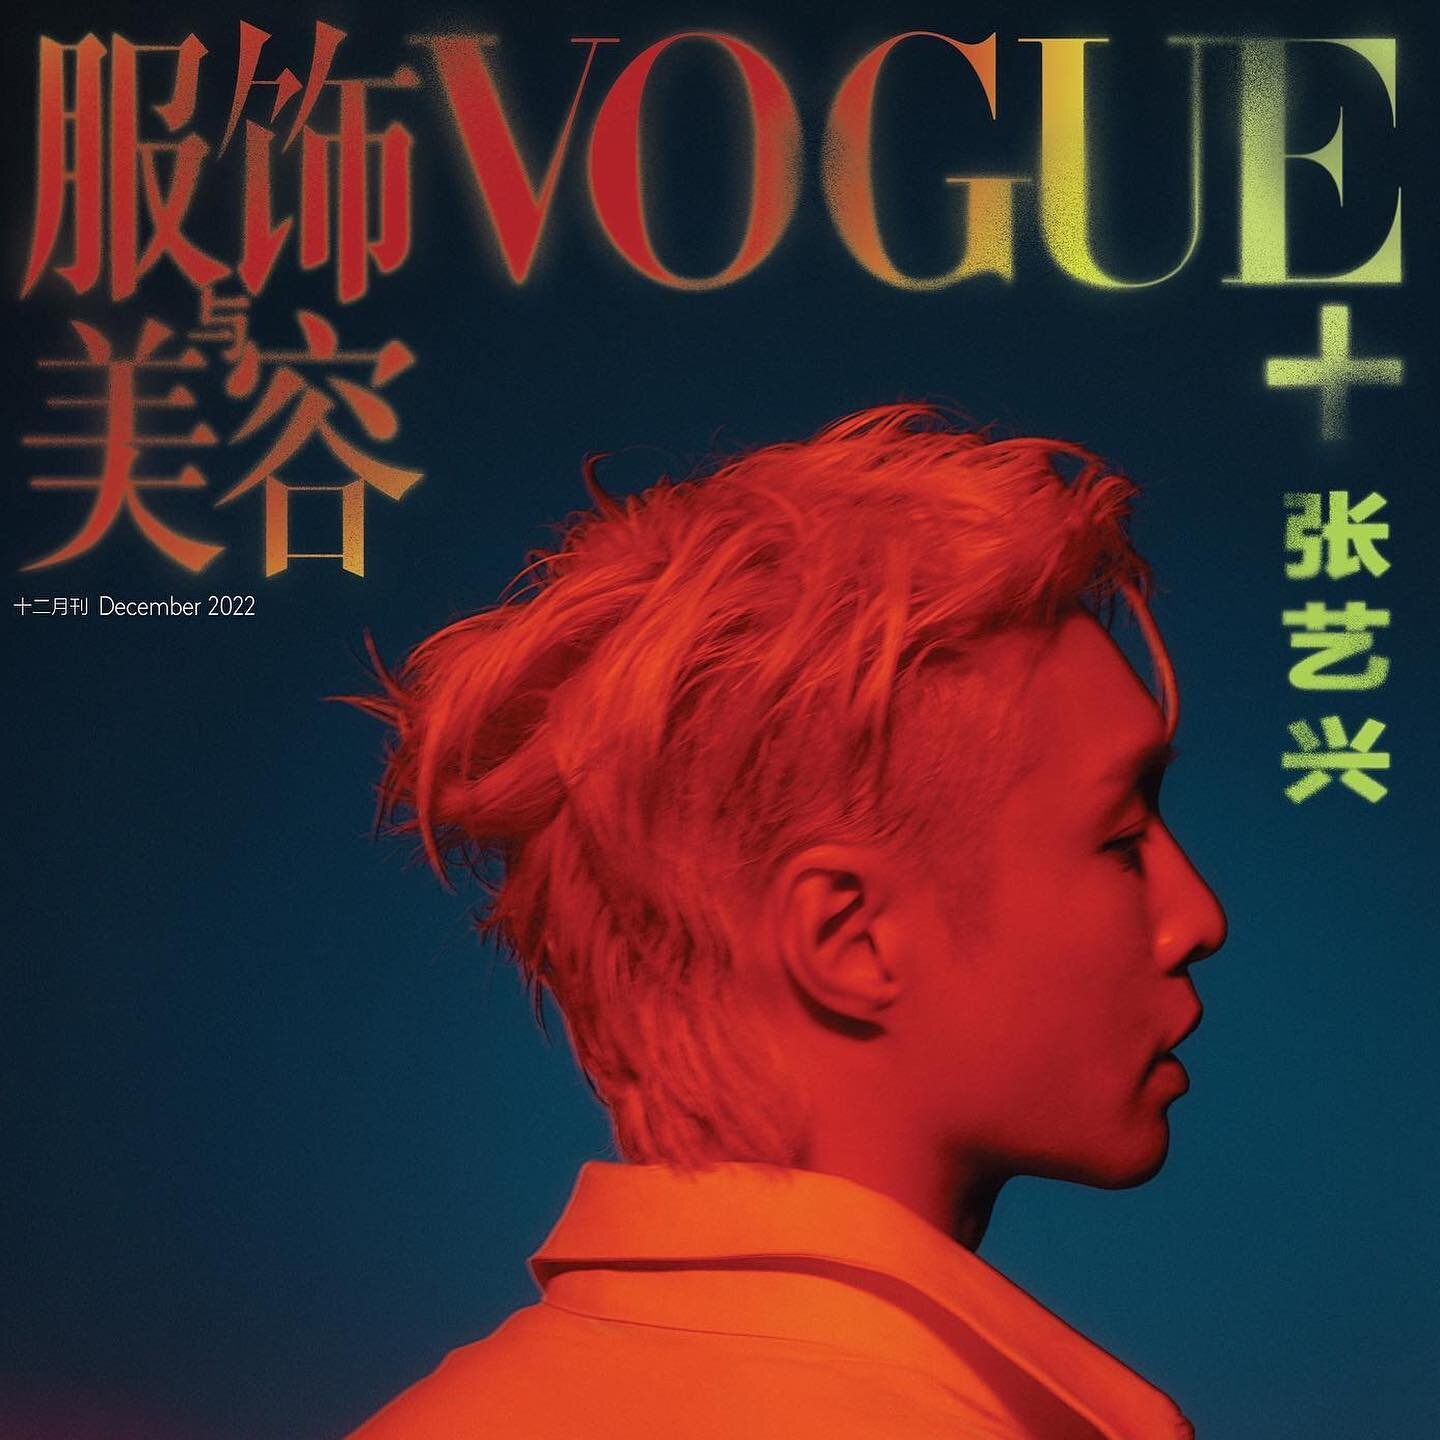 Lay Zhang graced the cover of the @vogueplus December issue and we cannot get enough!!! 🤩 

The VOGUE+ team joined @layzhang for his world tour and the final results are ICONIC 🙌🏼 The theme of their final 2022 issue, &ldquo;On the Road&rdquo;, sig